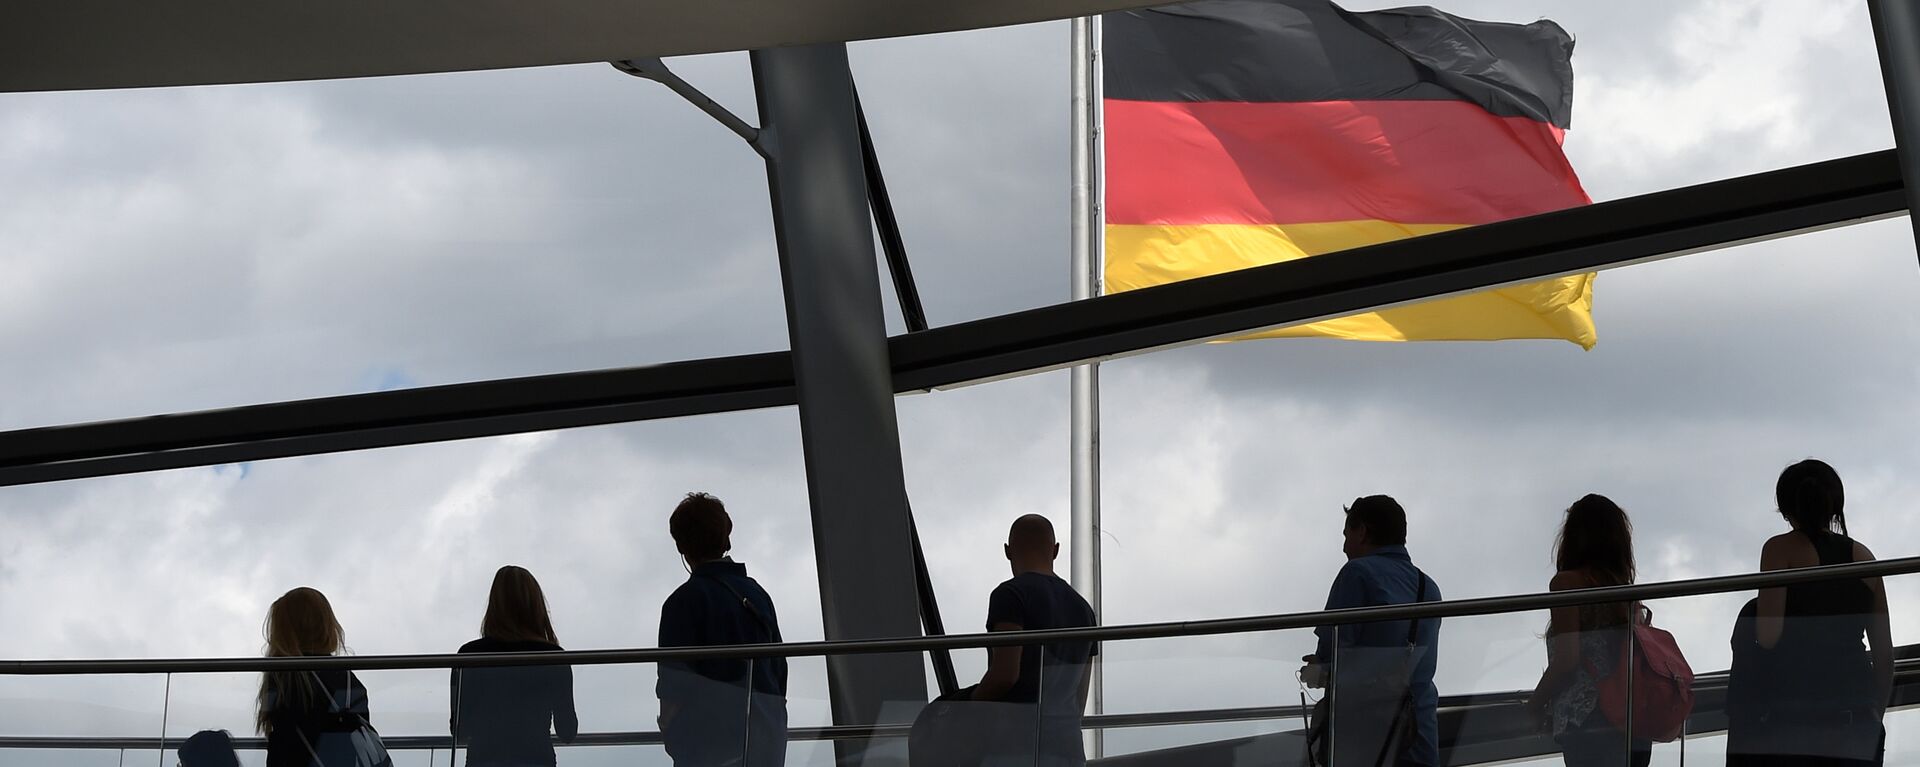 Visitors walk in the glass cupola of the Reichstag building that hosts the German parliament (Bundestag) and look at a German flag in Berlin, Germany, on June 10, 2016. - Sputnik International, 1920, 04.12.2022